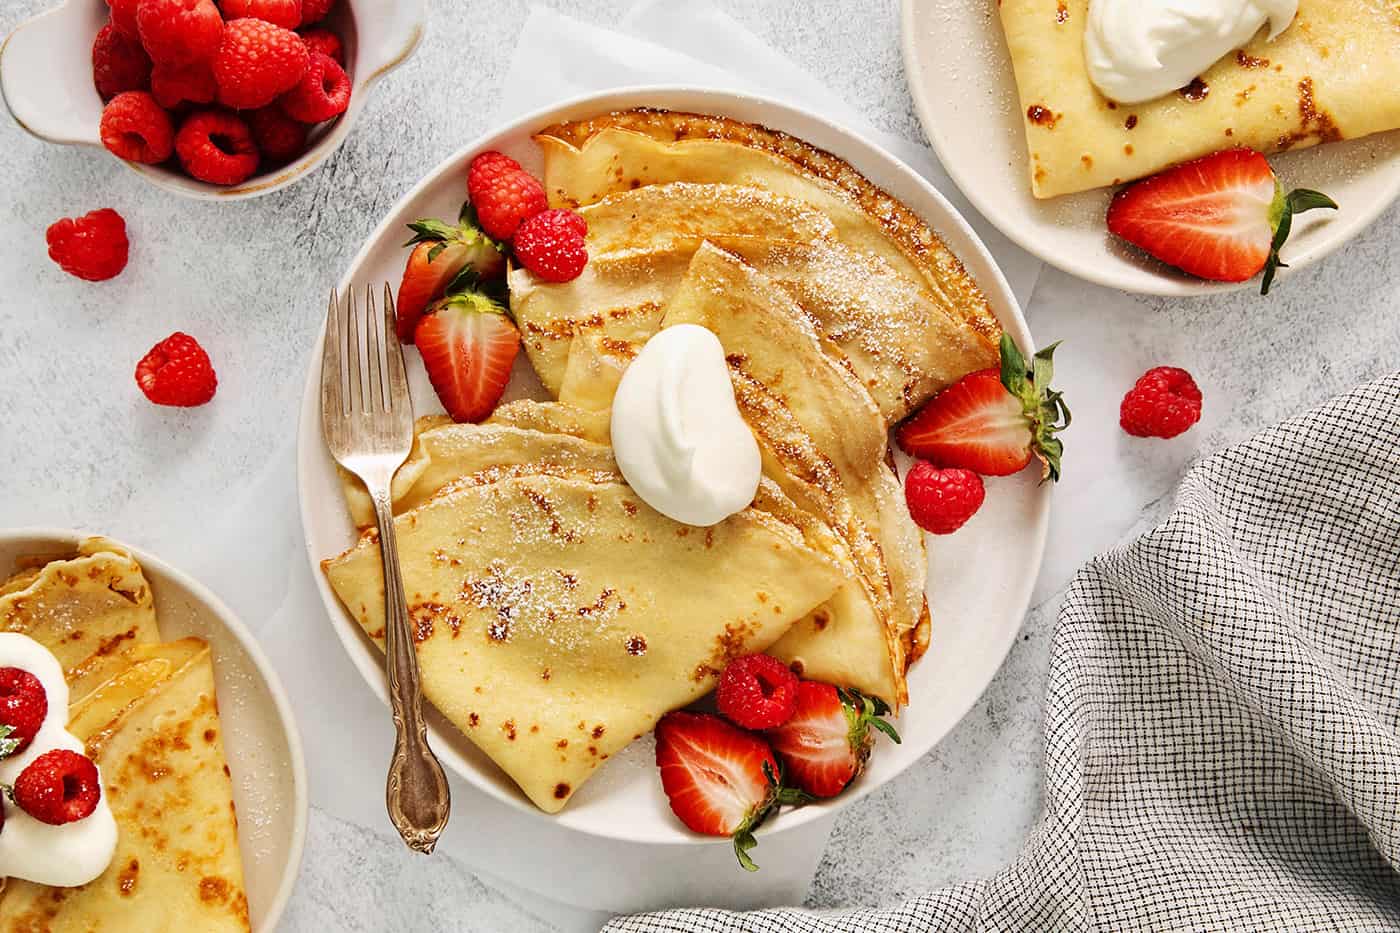 A plate of French crepes topped with fruit on a table.